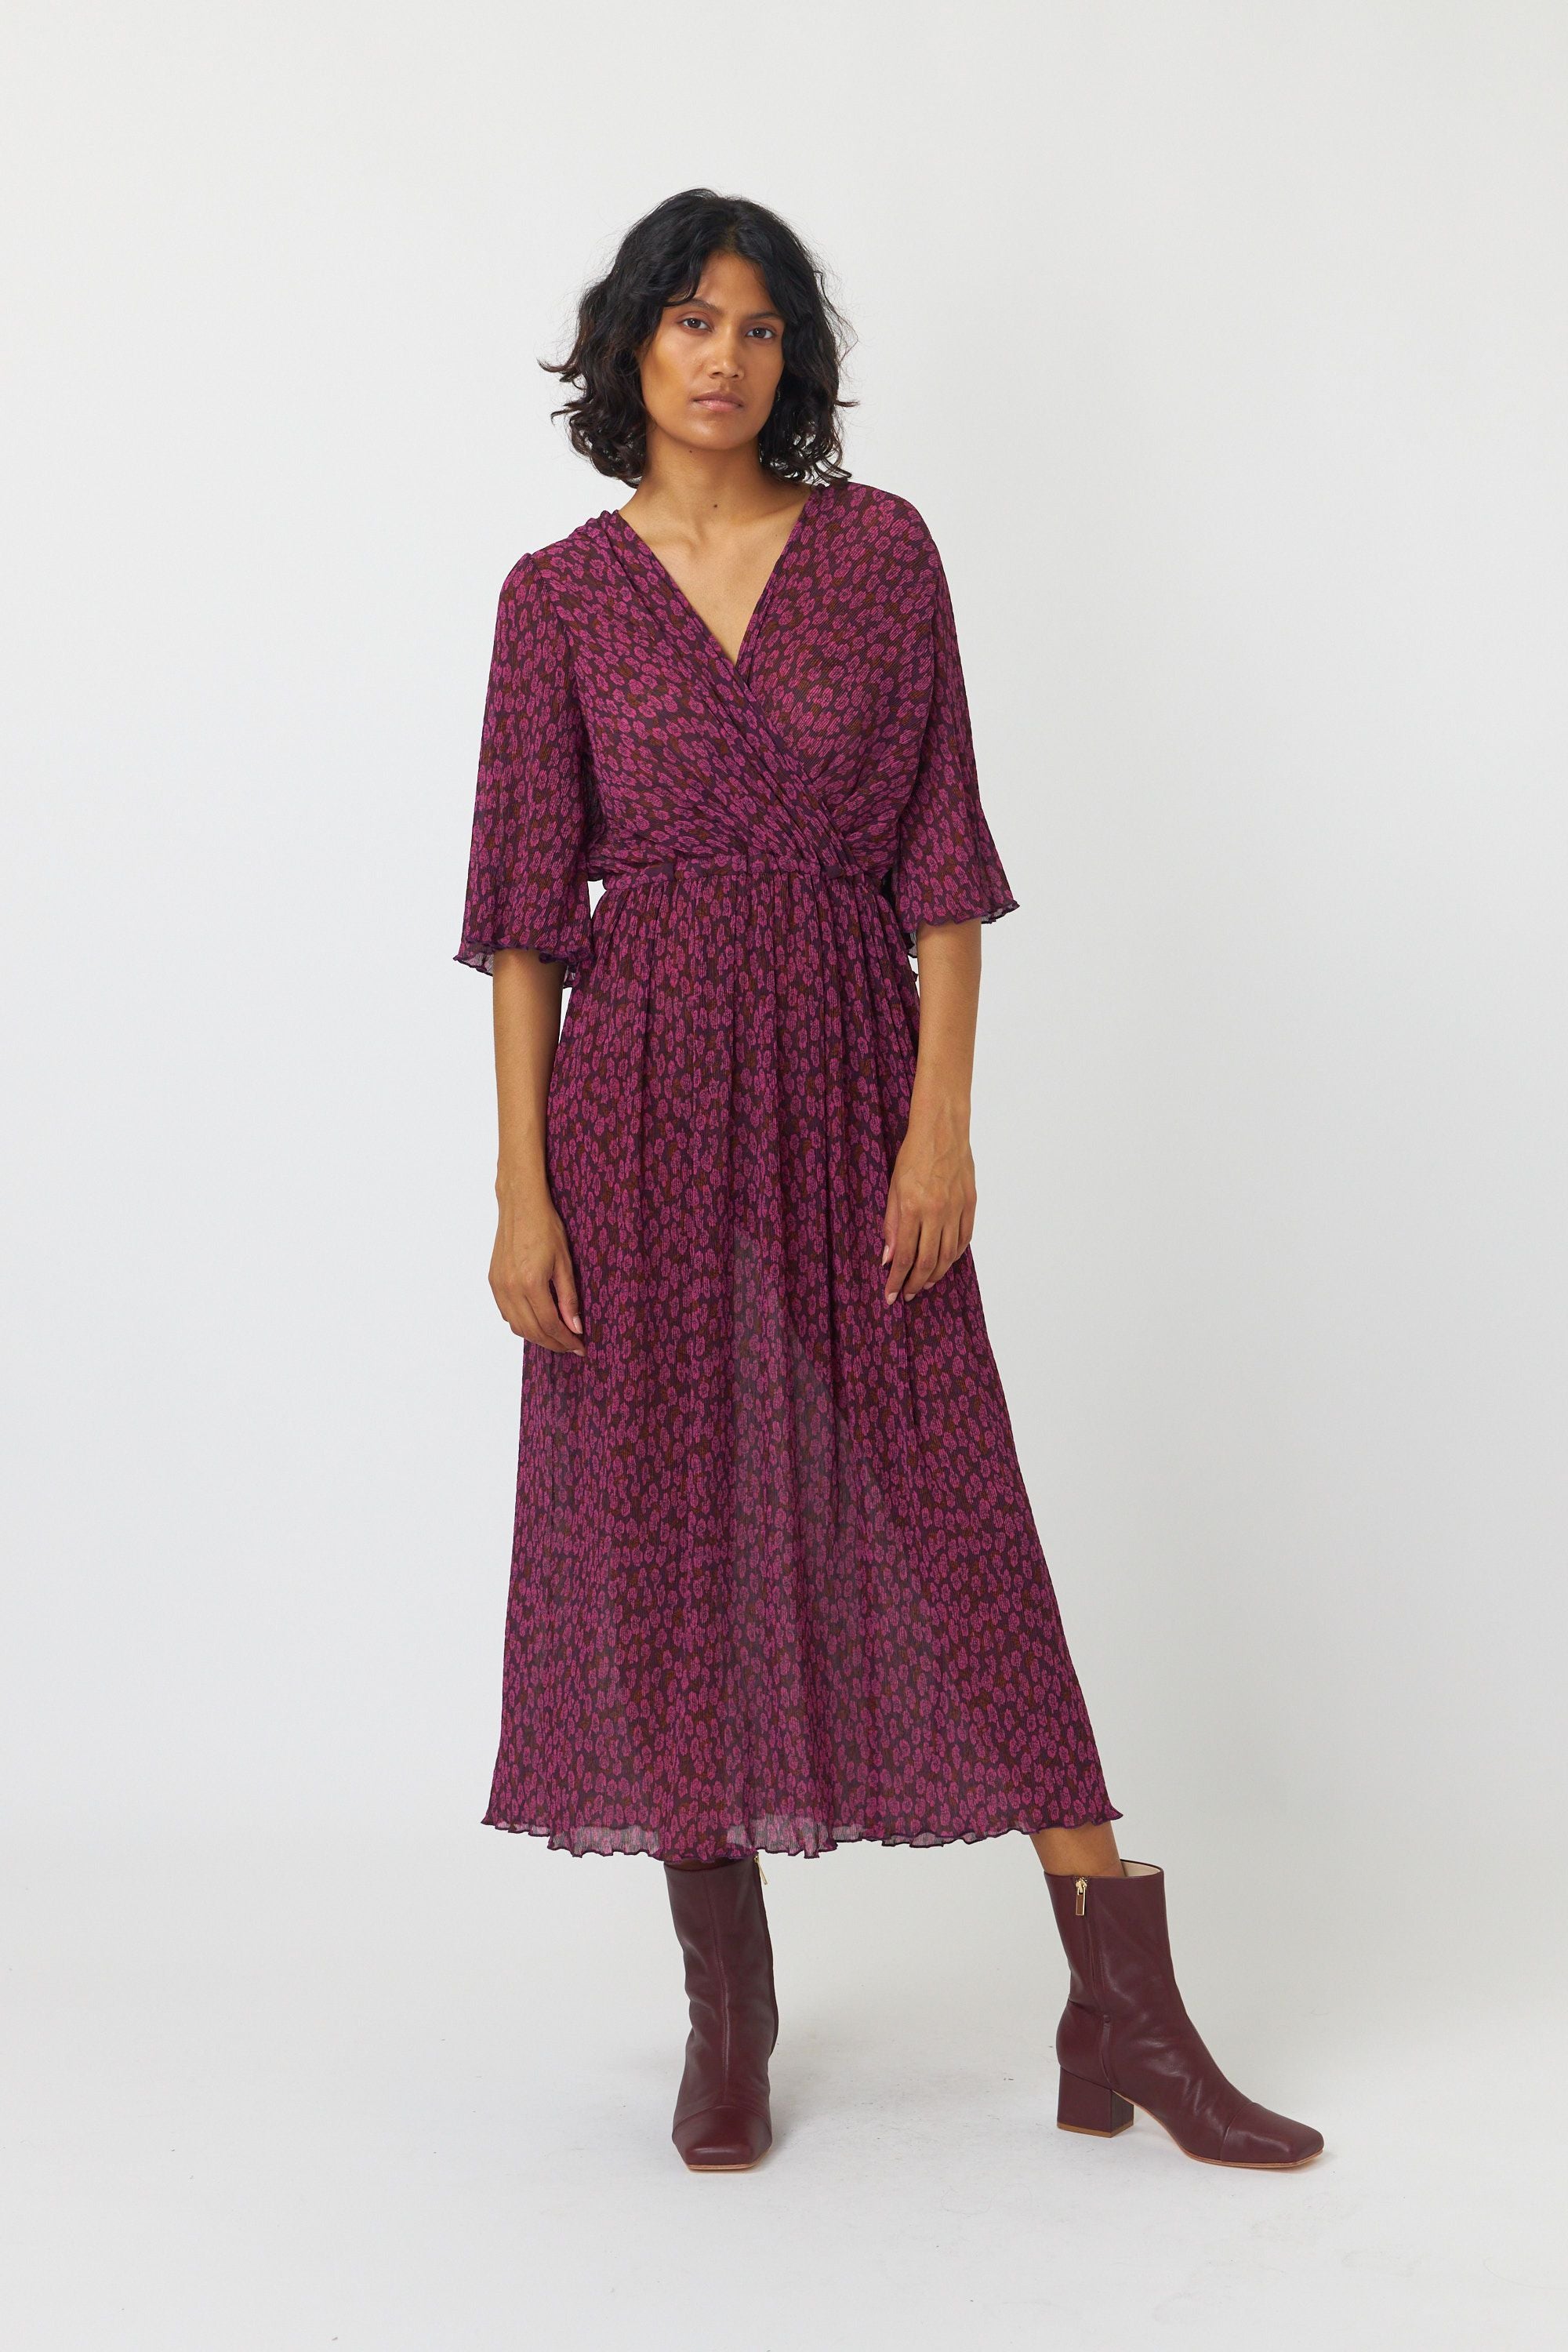 Sylvester Blooming Dress - Berry